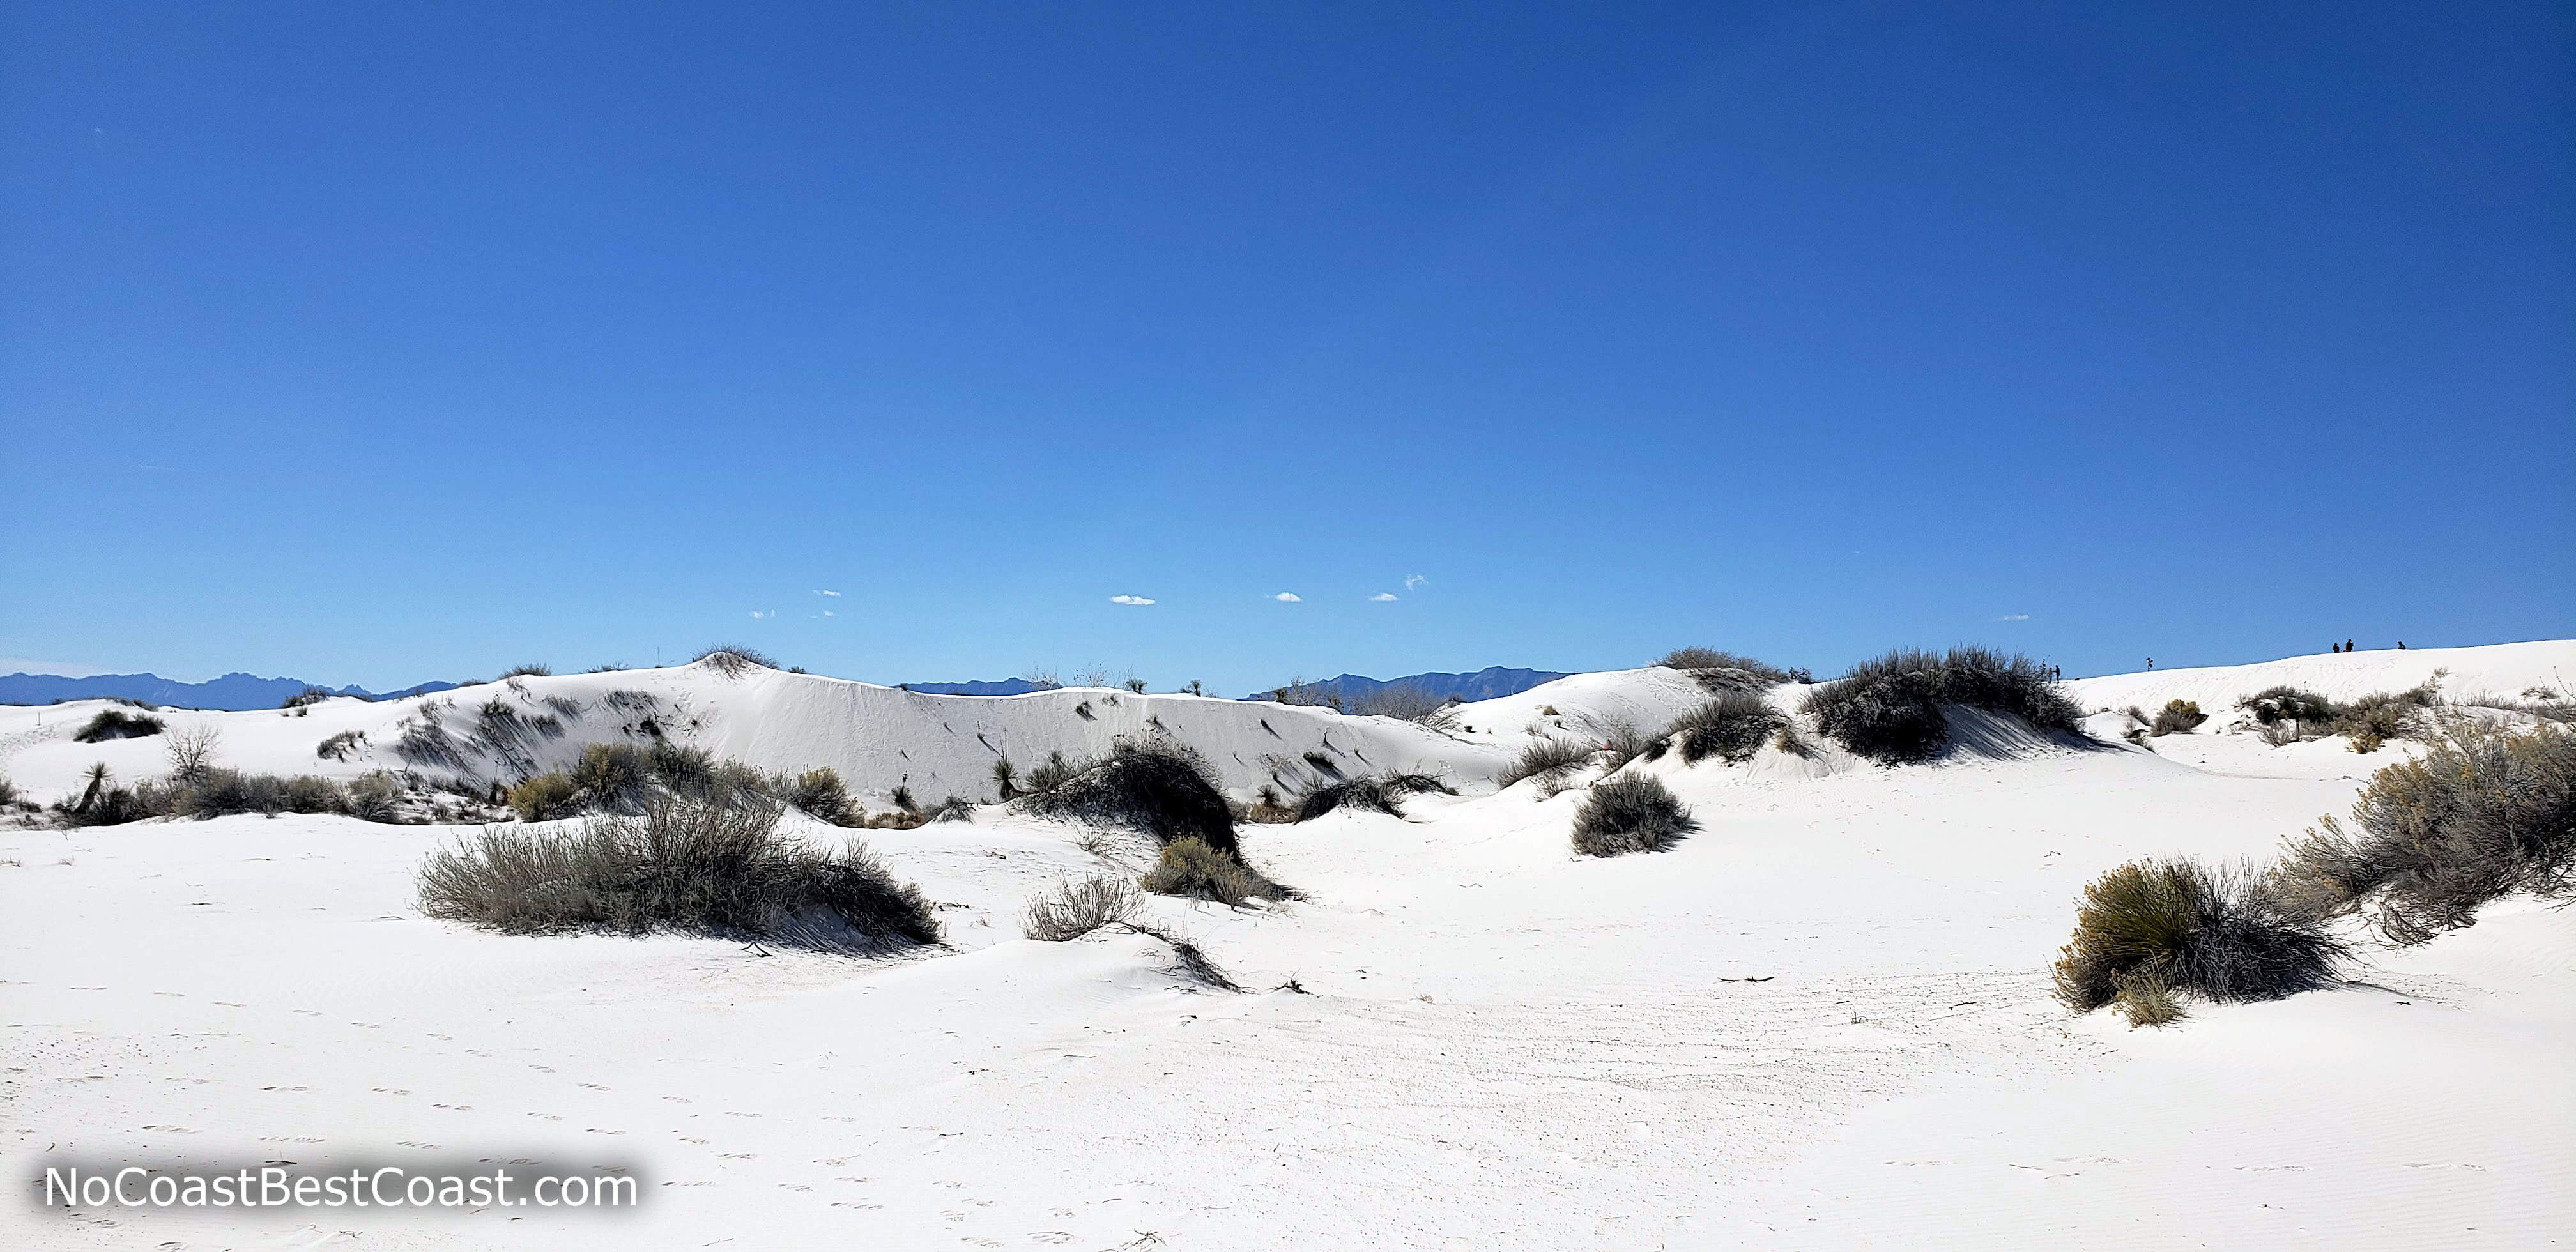 The famous bright white dunes with shrubs interspersed